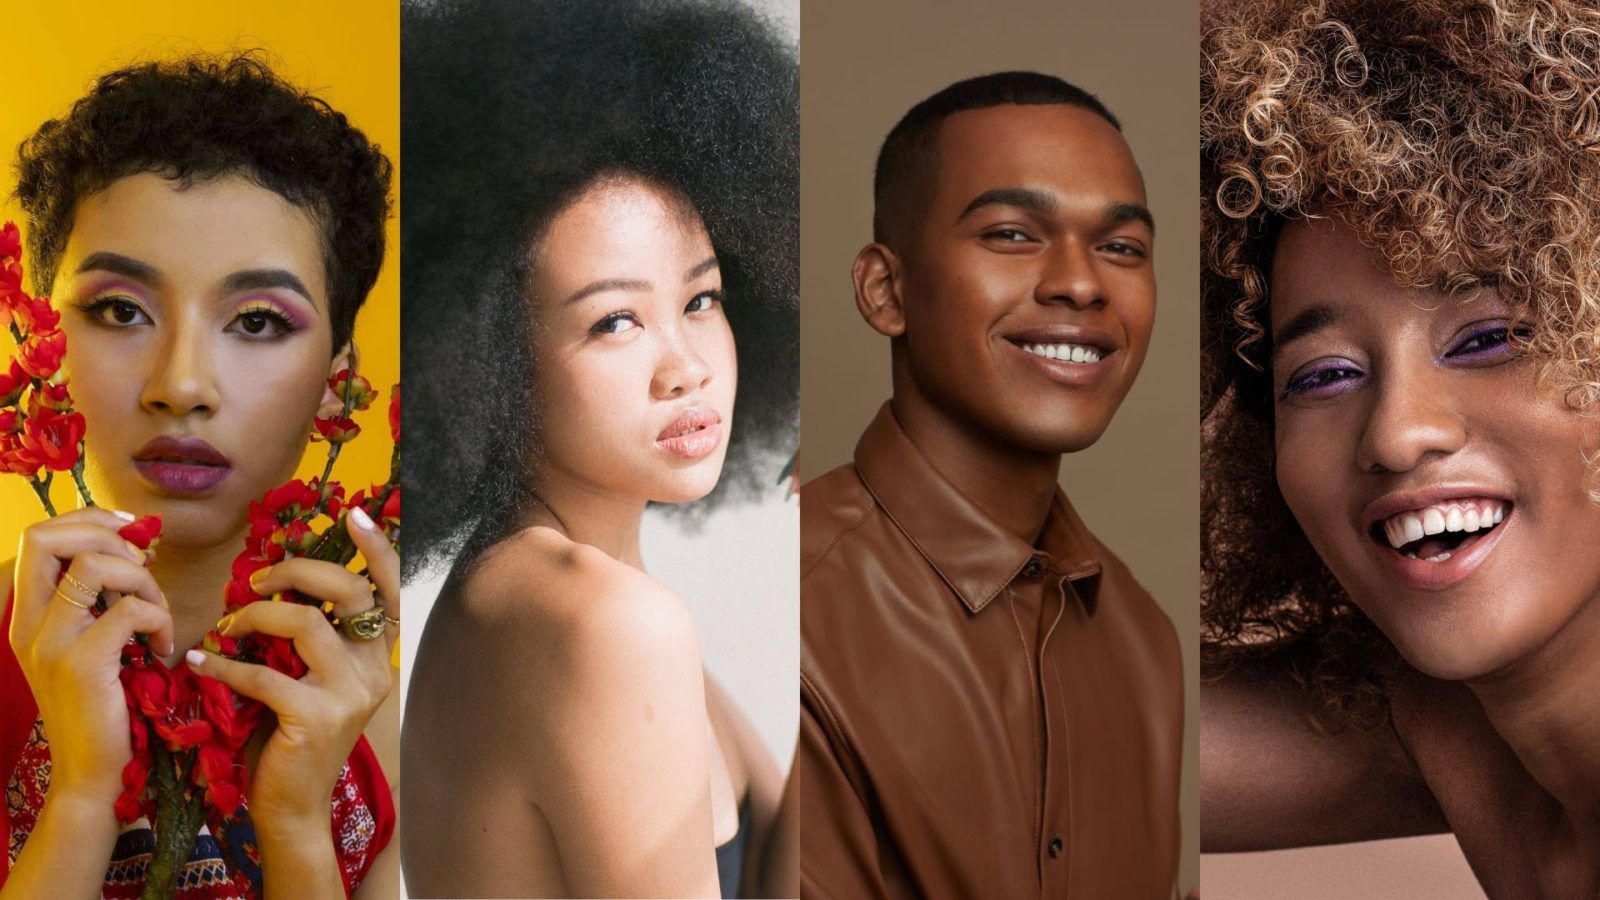 Black and Asian: 4 emerging models on creating space for themselves in fashion and entertainment